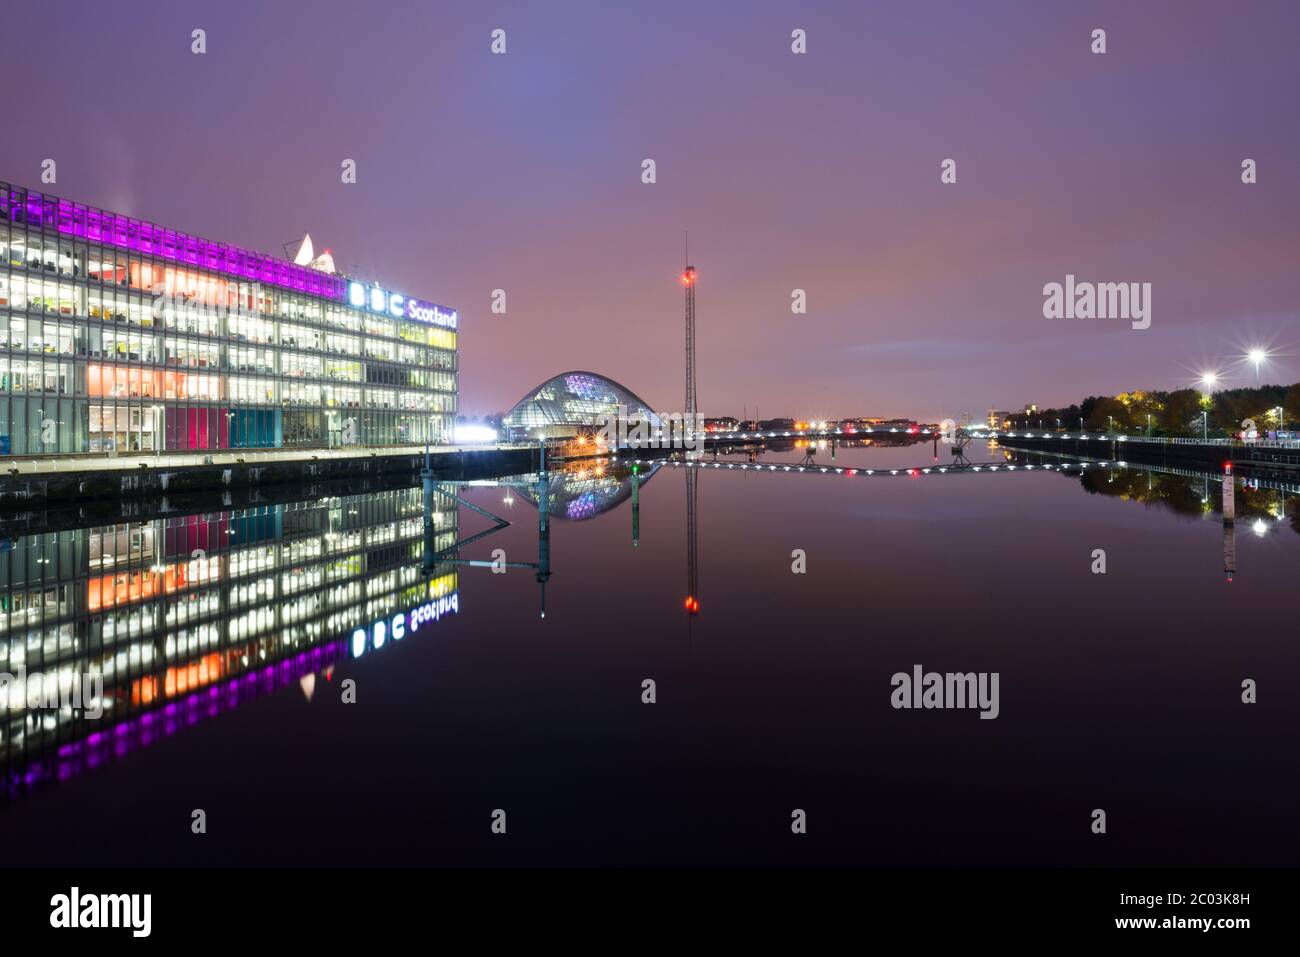 The BBC Scotland building in Glasgow reflected in the river Clyde Stock Photo